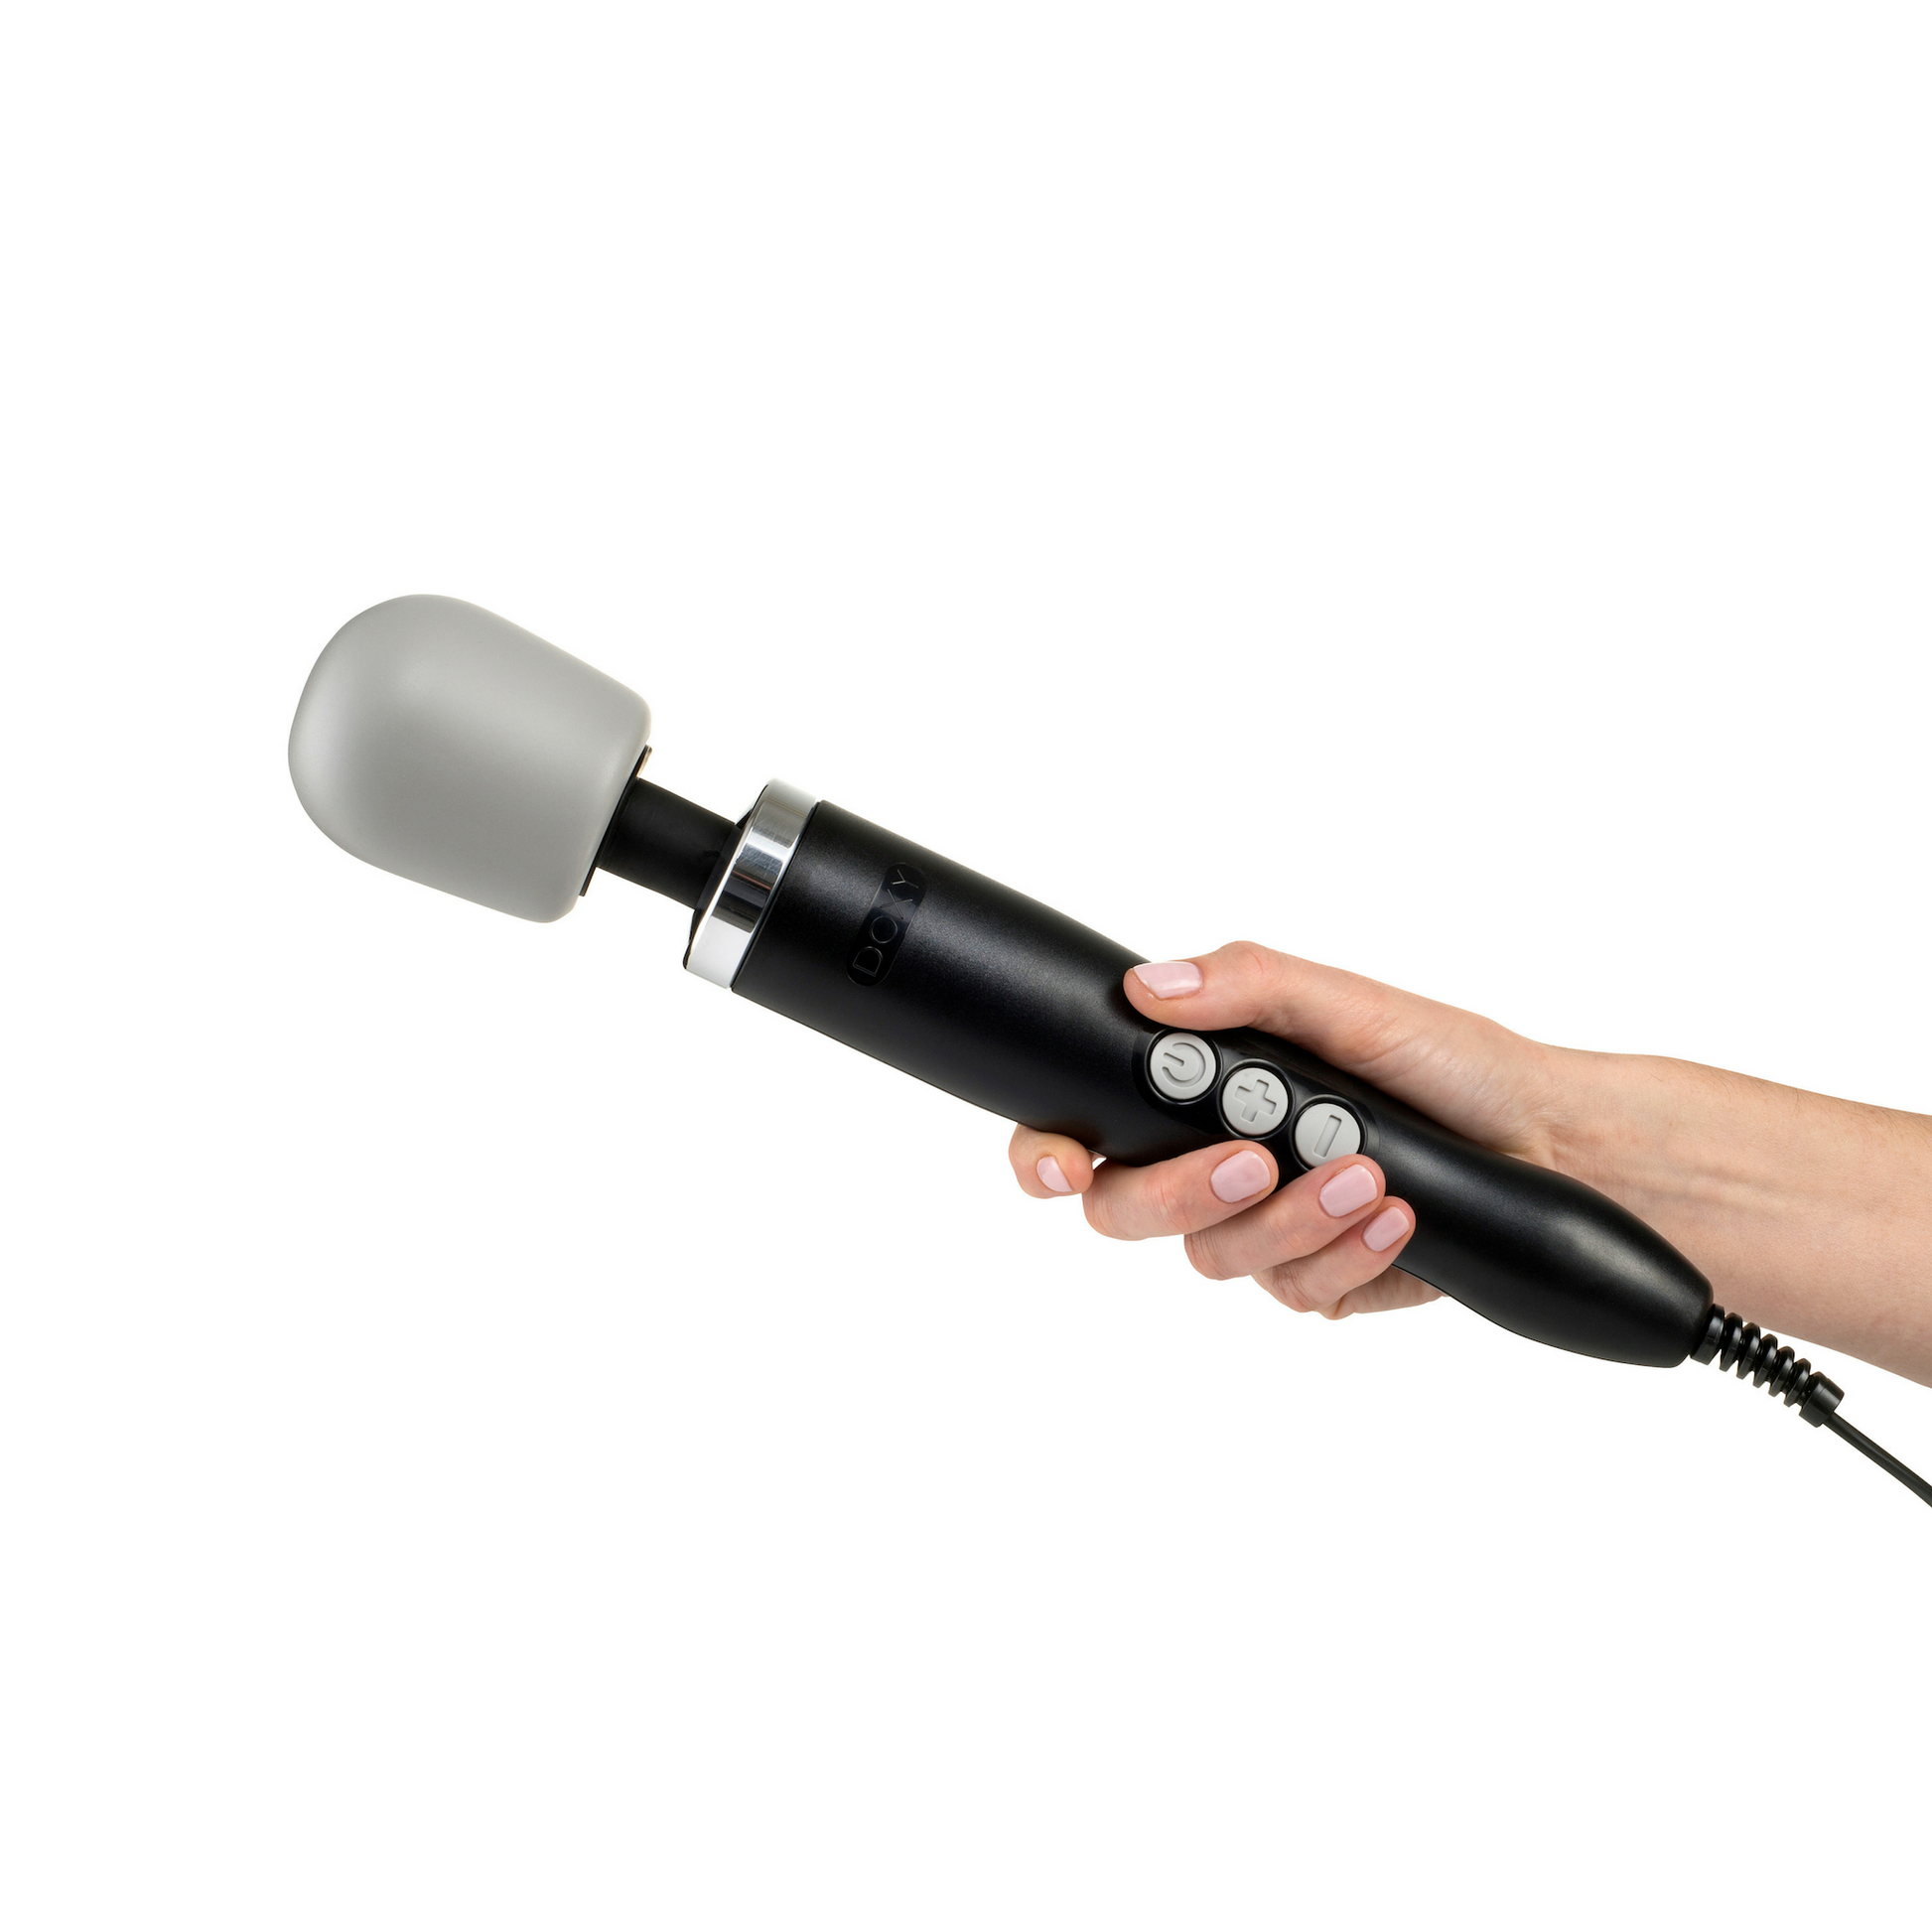 Doxy Original wand in Black being held. Vibrating Wand product image